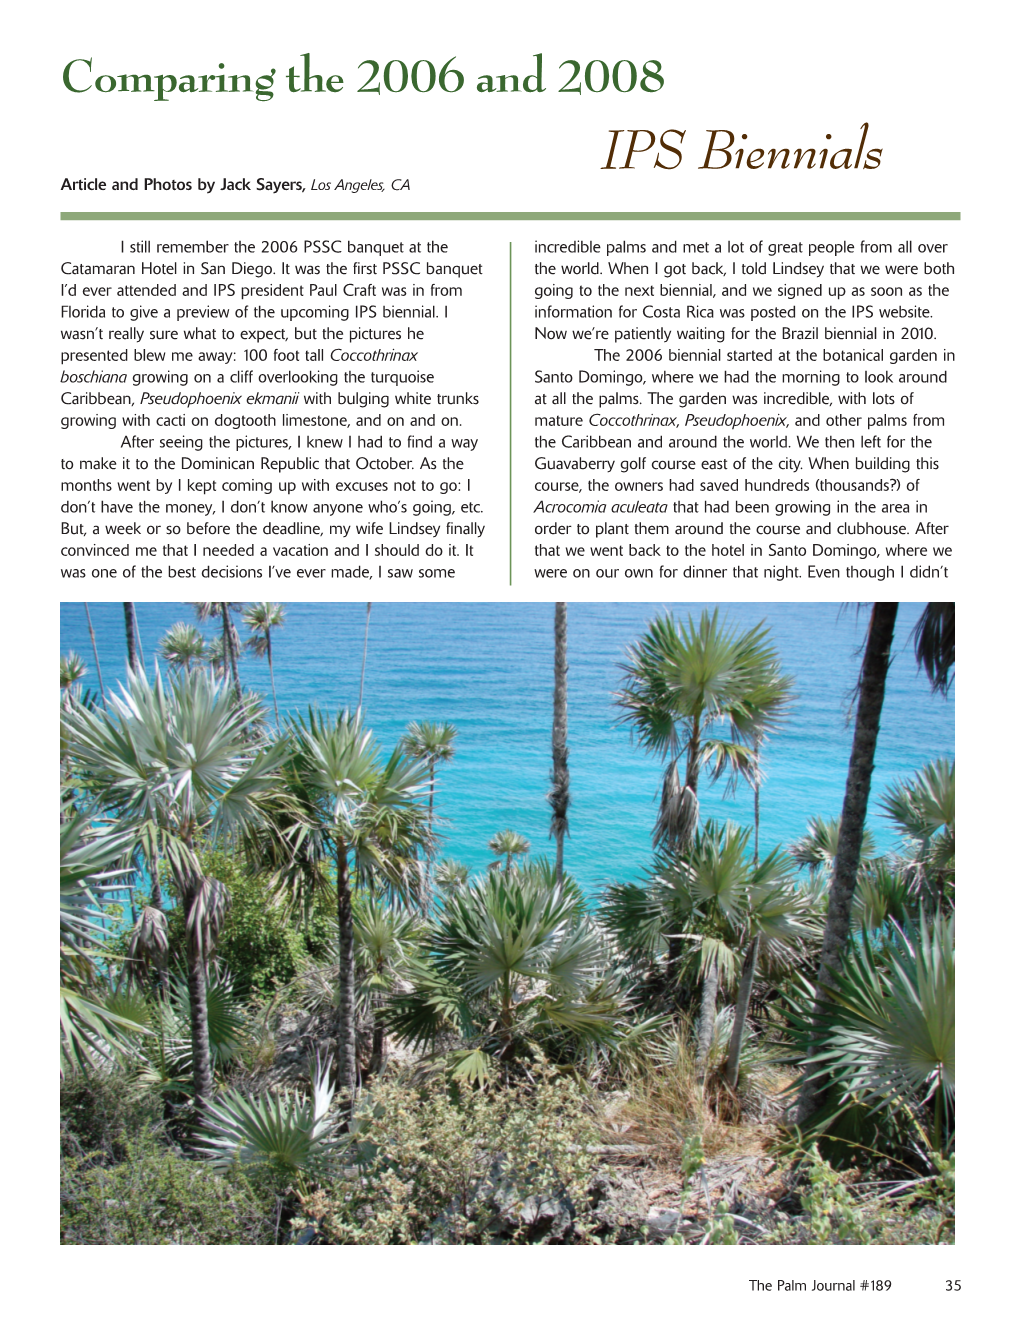 IPS Biennials Article and Photos by Jack Sayers, Los Angeles, CA